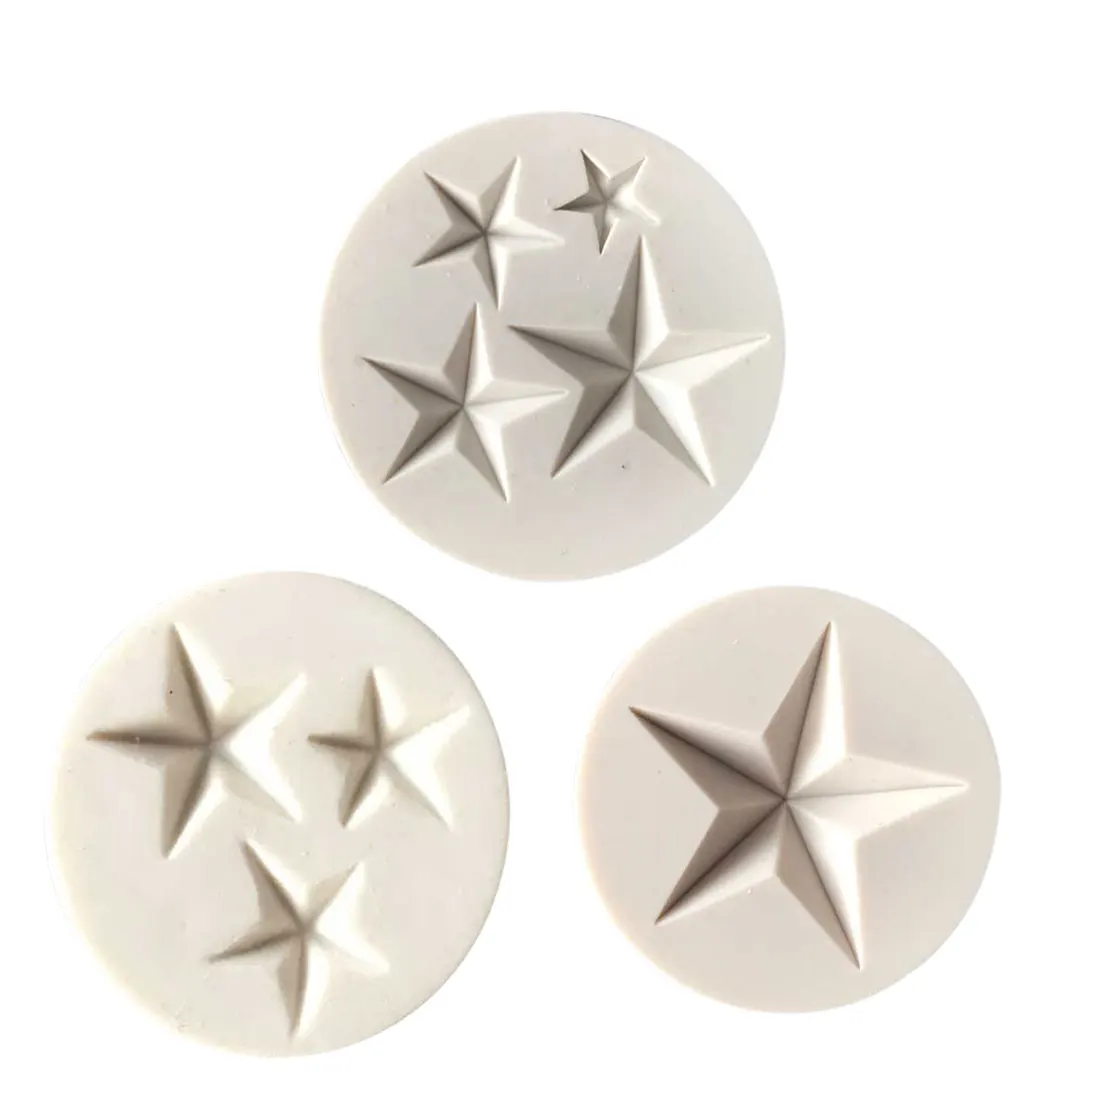 

Hot Sale Five-pointed Star Fondant Cake Silicone Mold DIY Candy Cookie Cupcake Molds Baking Decorating Tools Biscuits Mould